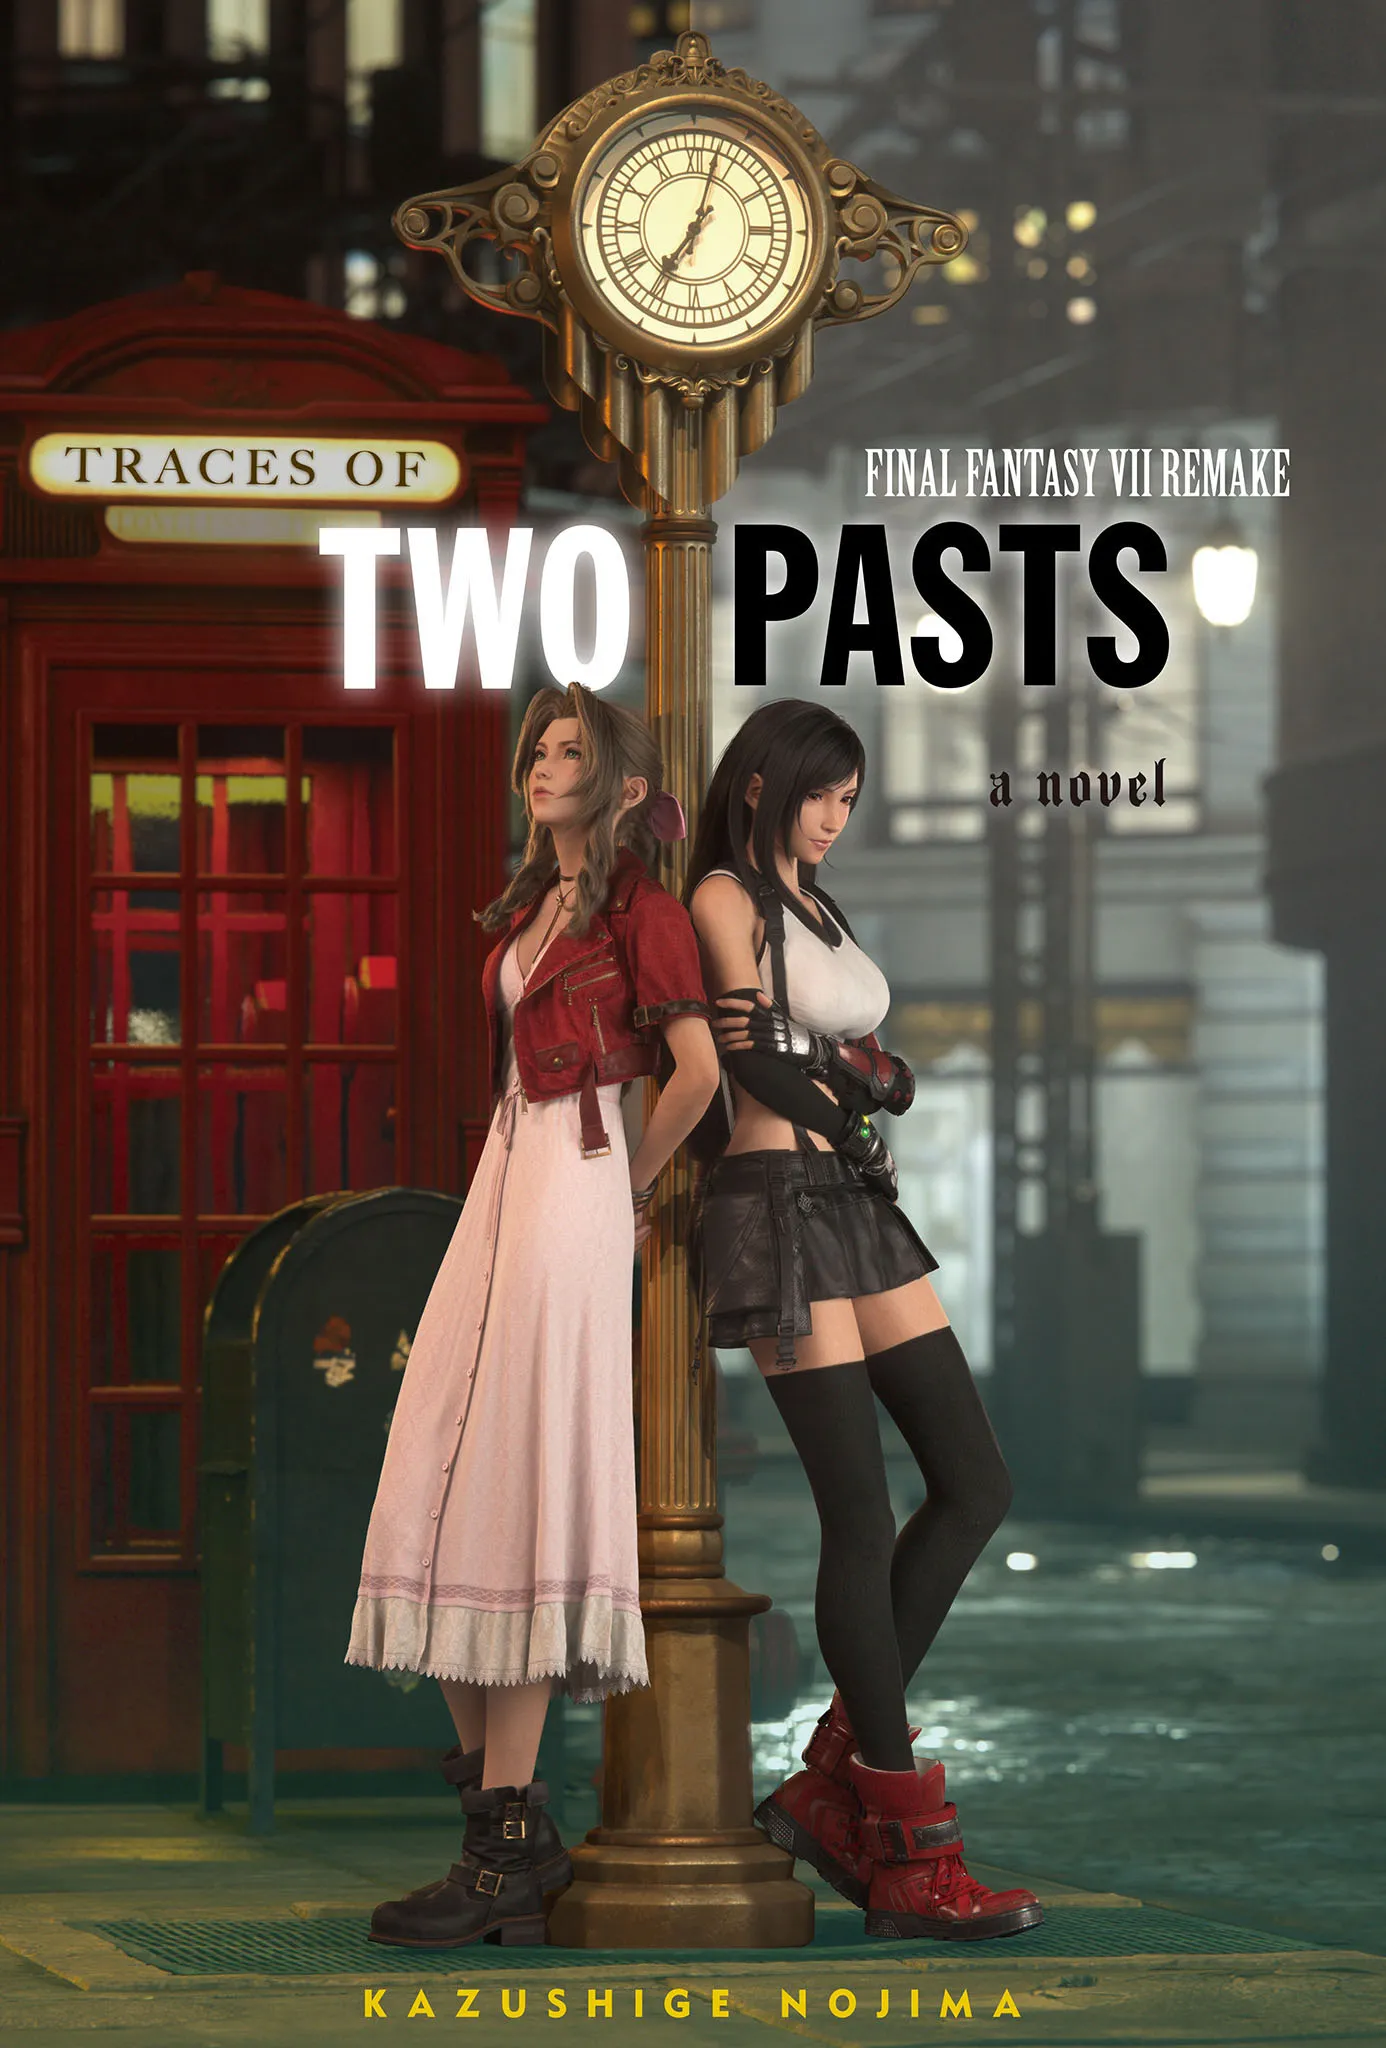 Final Fantasy VII Remake: Traces of Two Pasts (Final Fantasy VII)